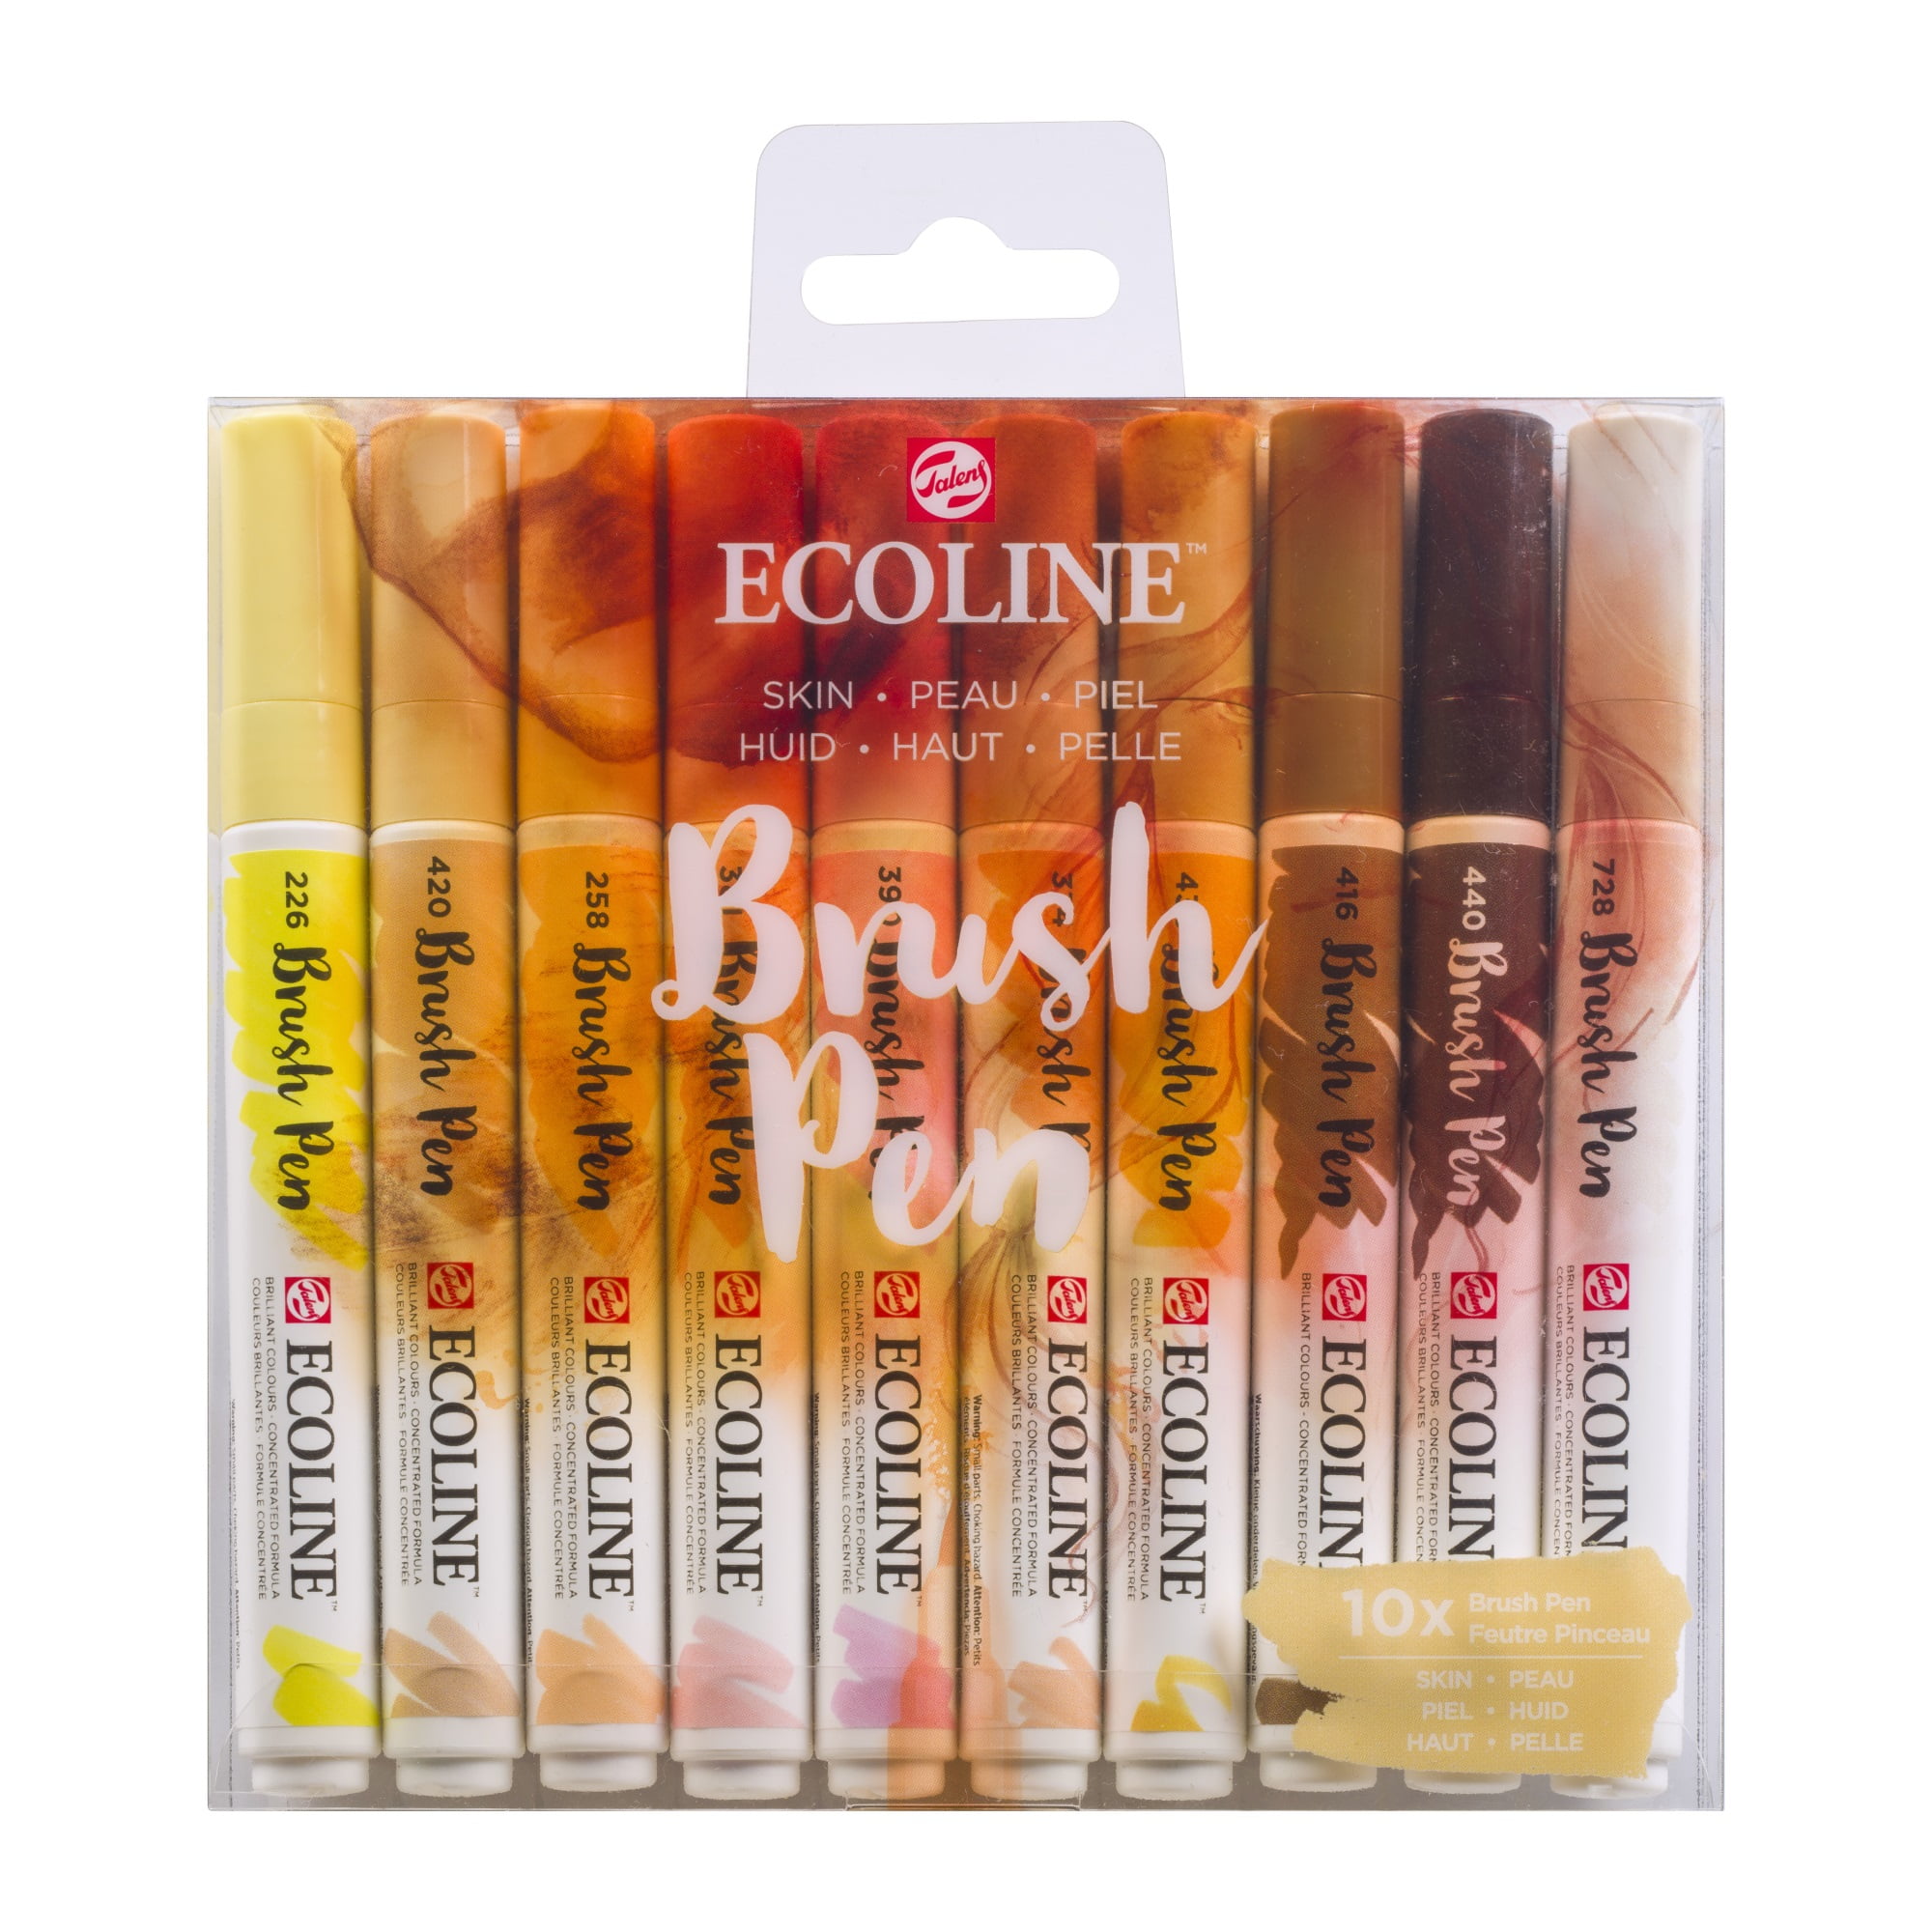  ECOLINE Talens 10 brush pens. : Arts, Crafts & Sewing